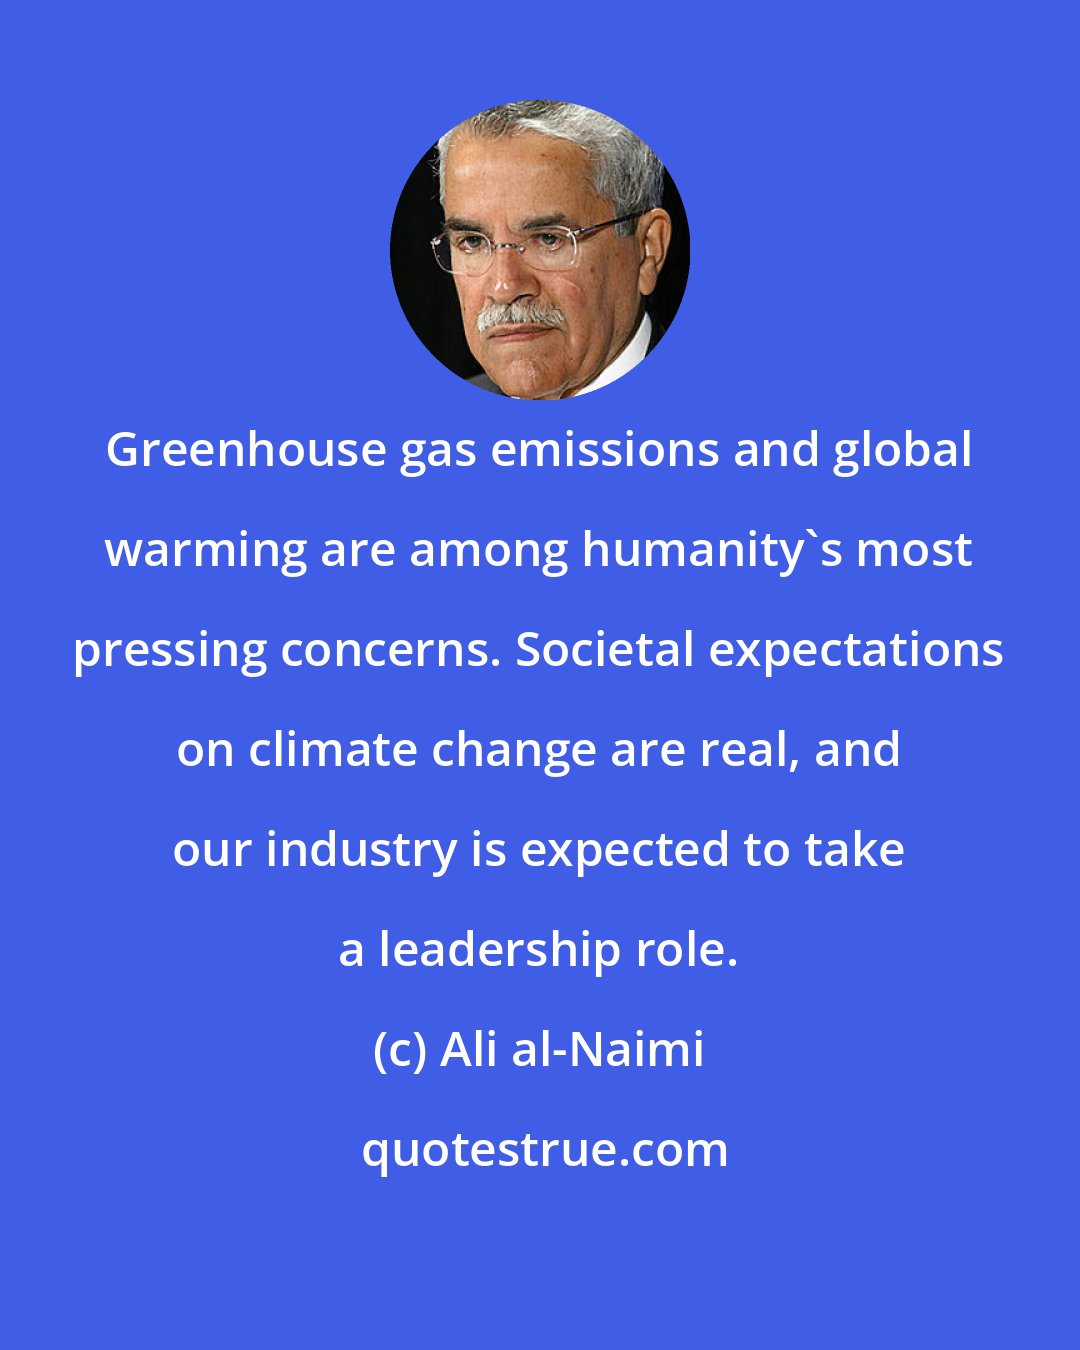 Ali al-Naimi: Greenhouse gas emissions and global warming are among humanity's most pressing concerns. Societal expectations on climate change are real, and our industry is expected to take a leadership role.